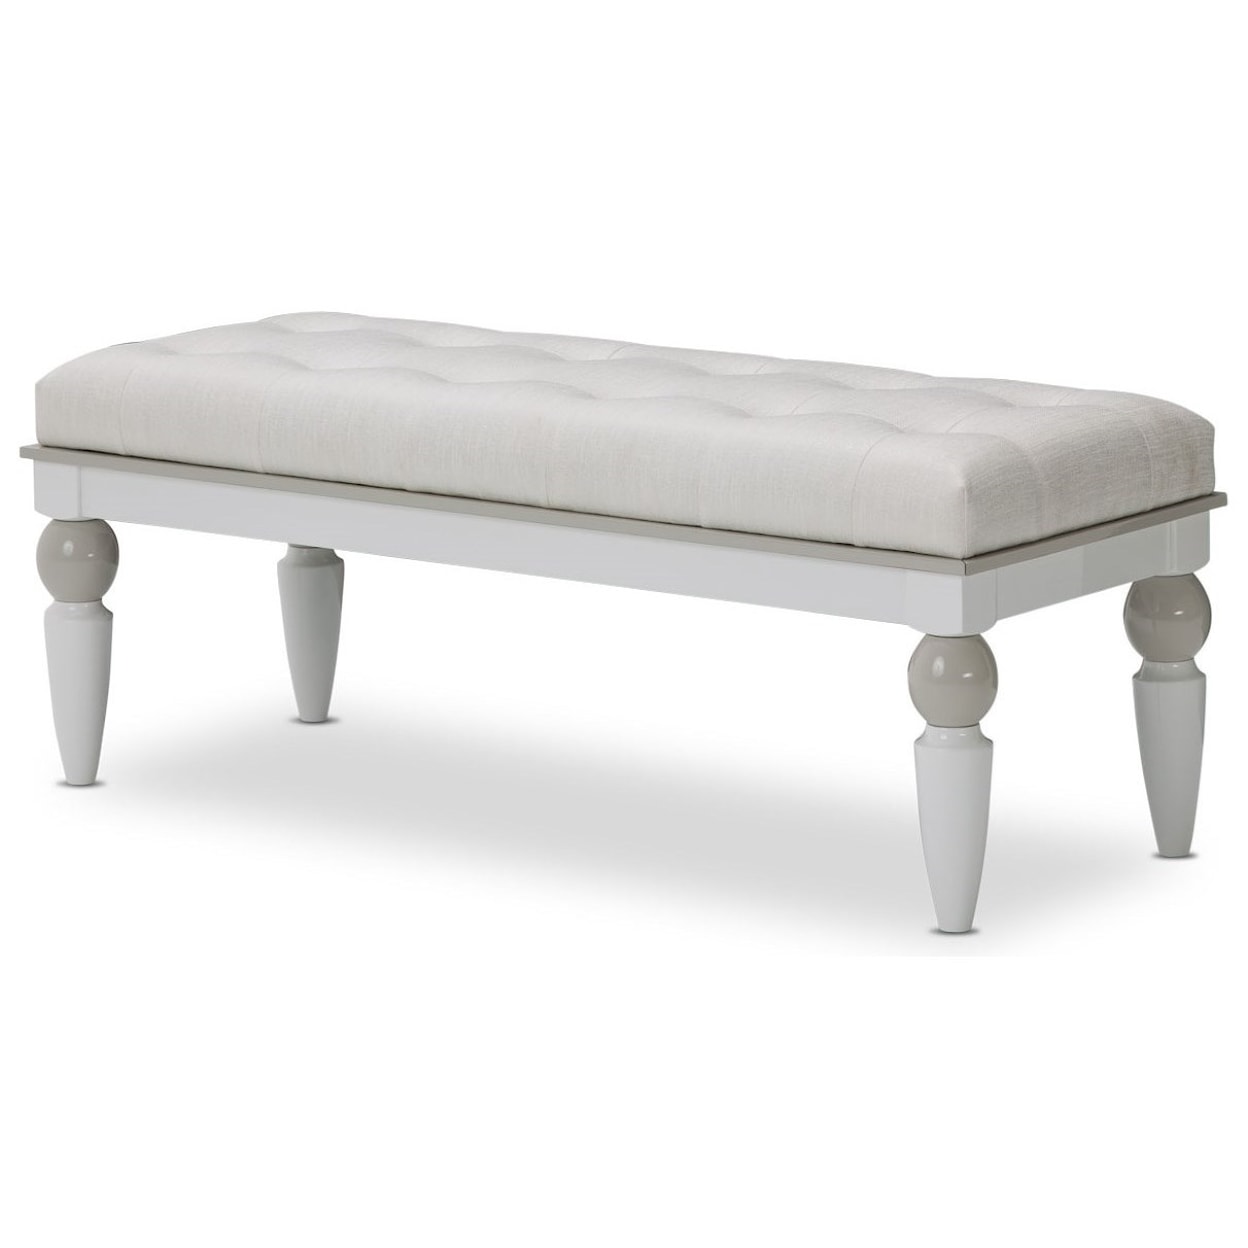 Michael Amini Sky Tower Bedside Bench